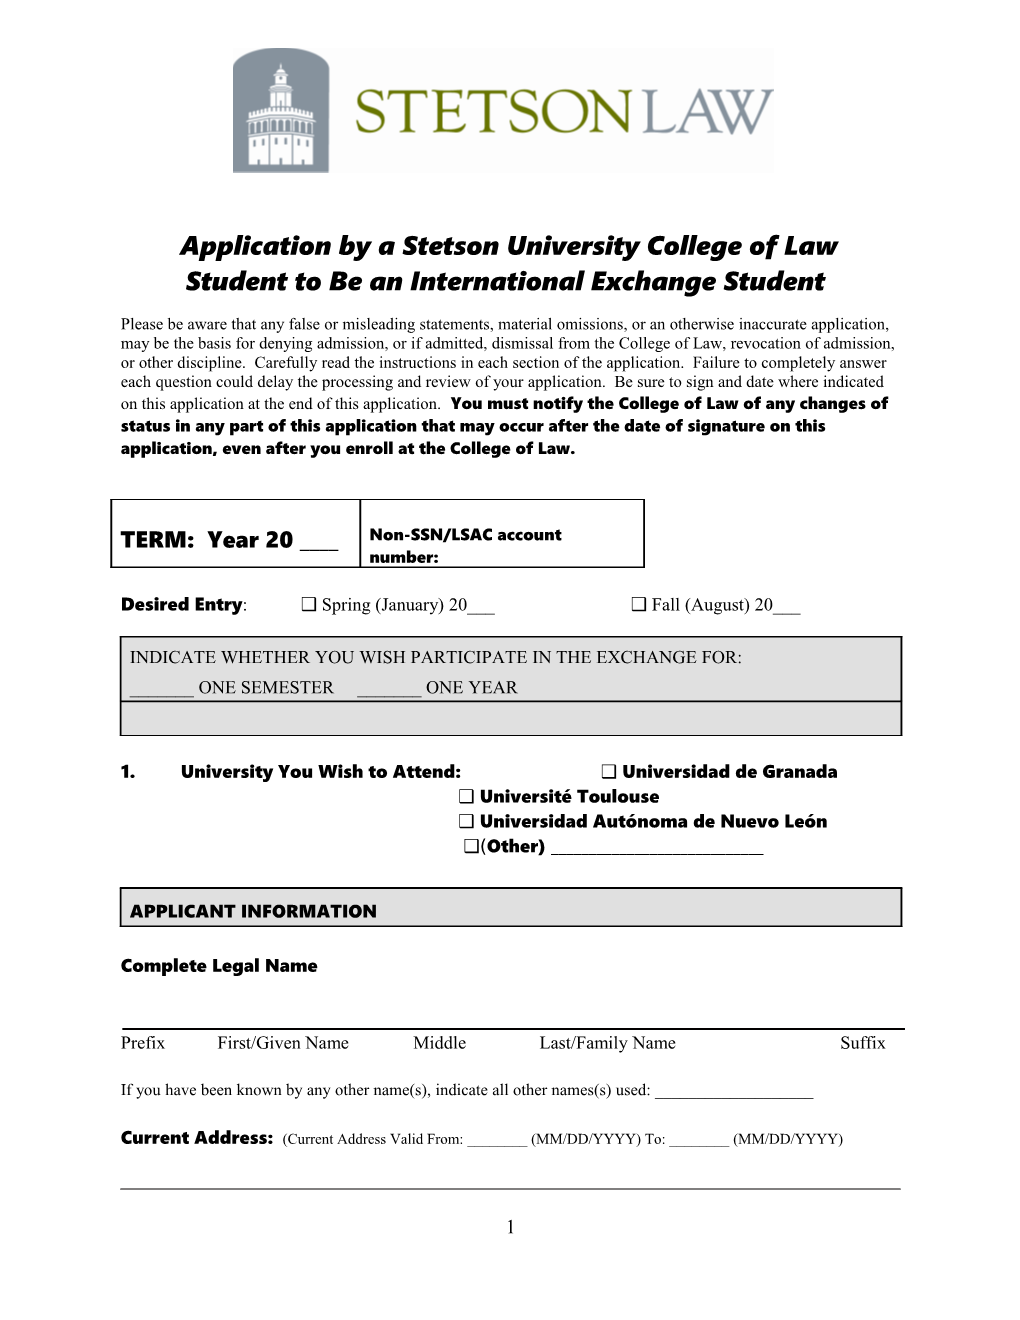 Application by a Stetson University College of Law